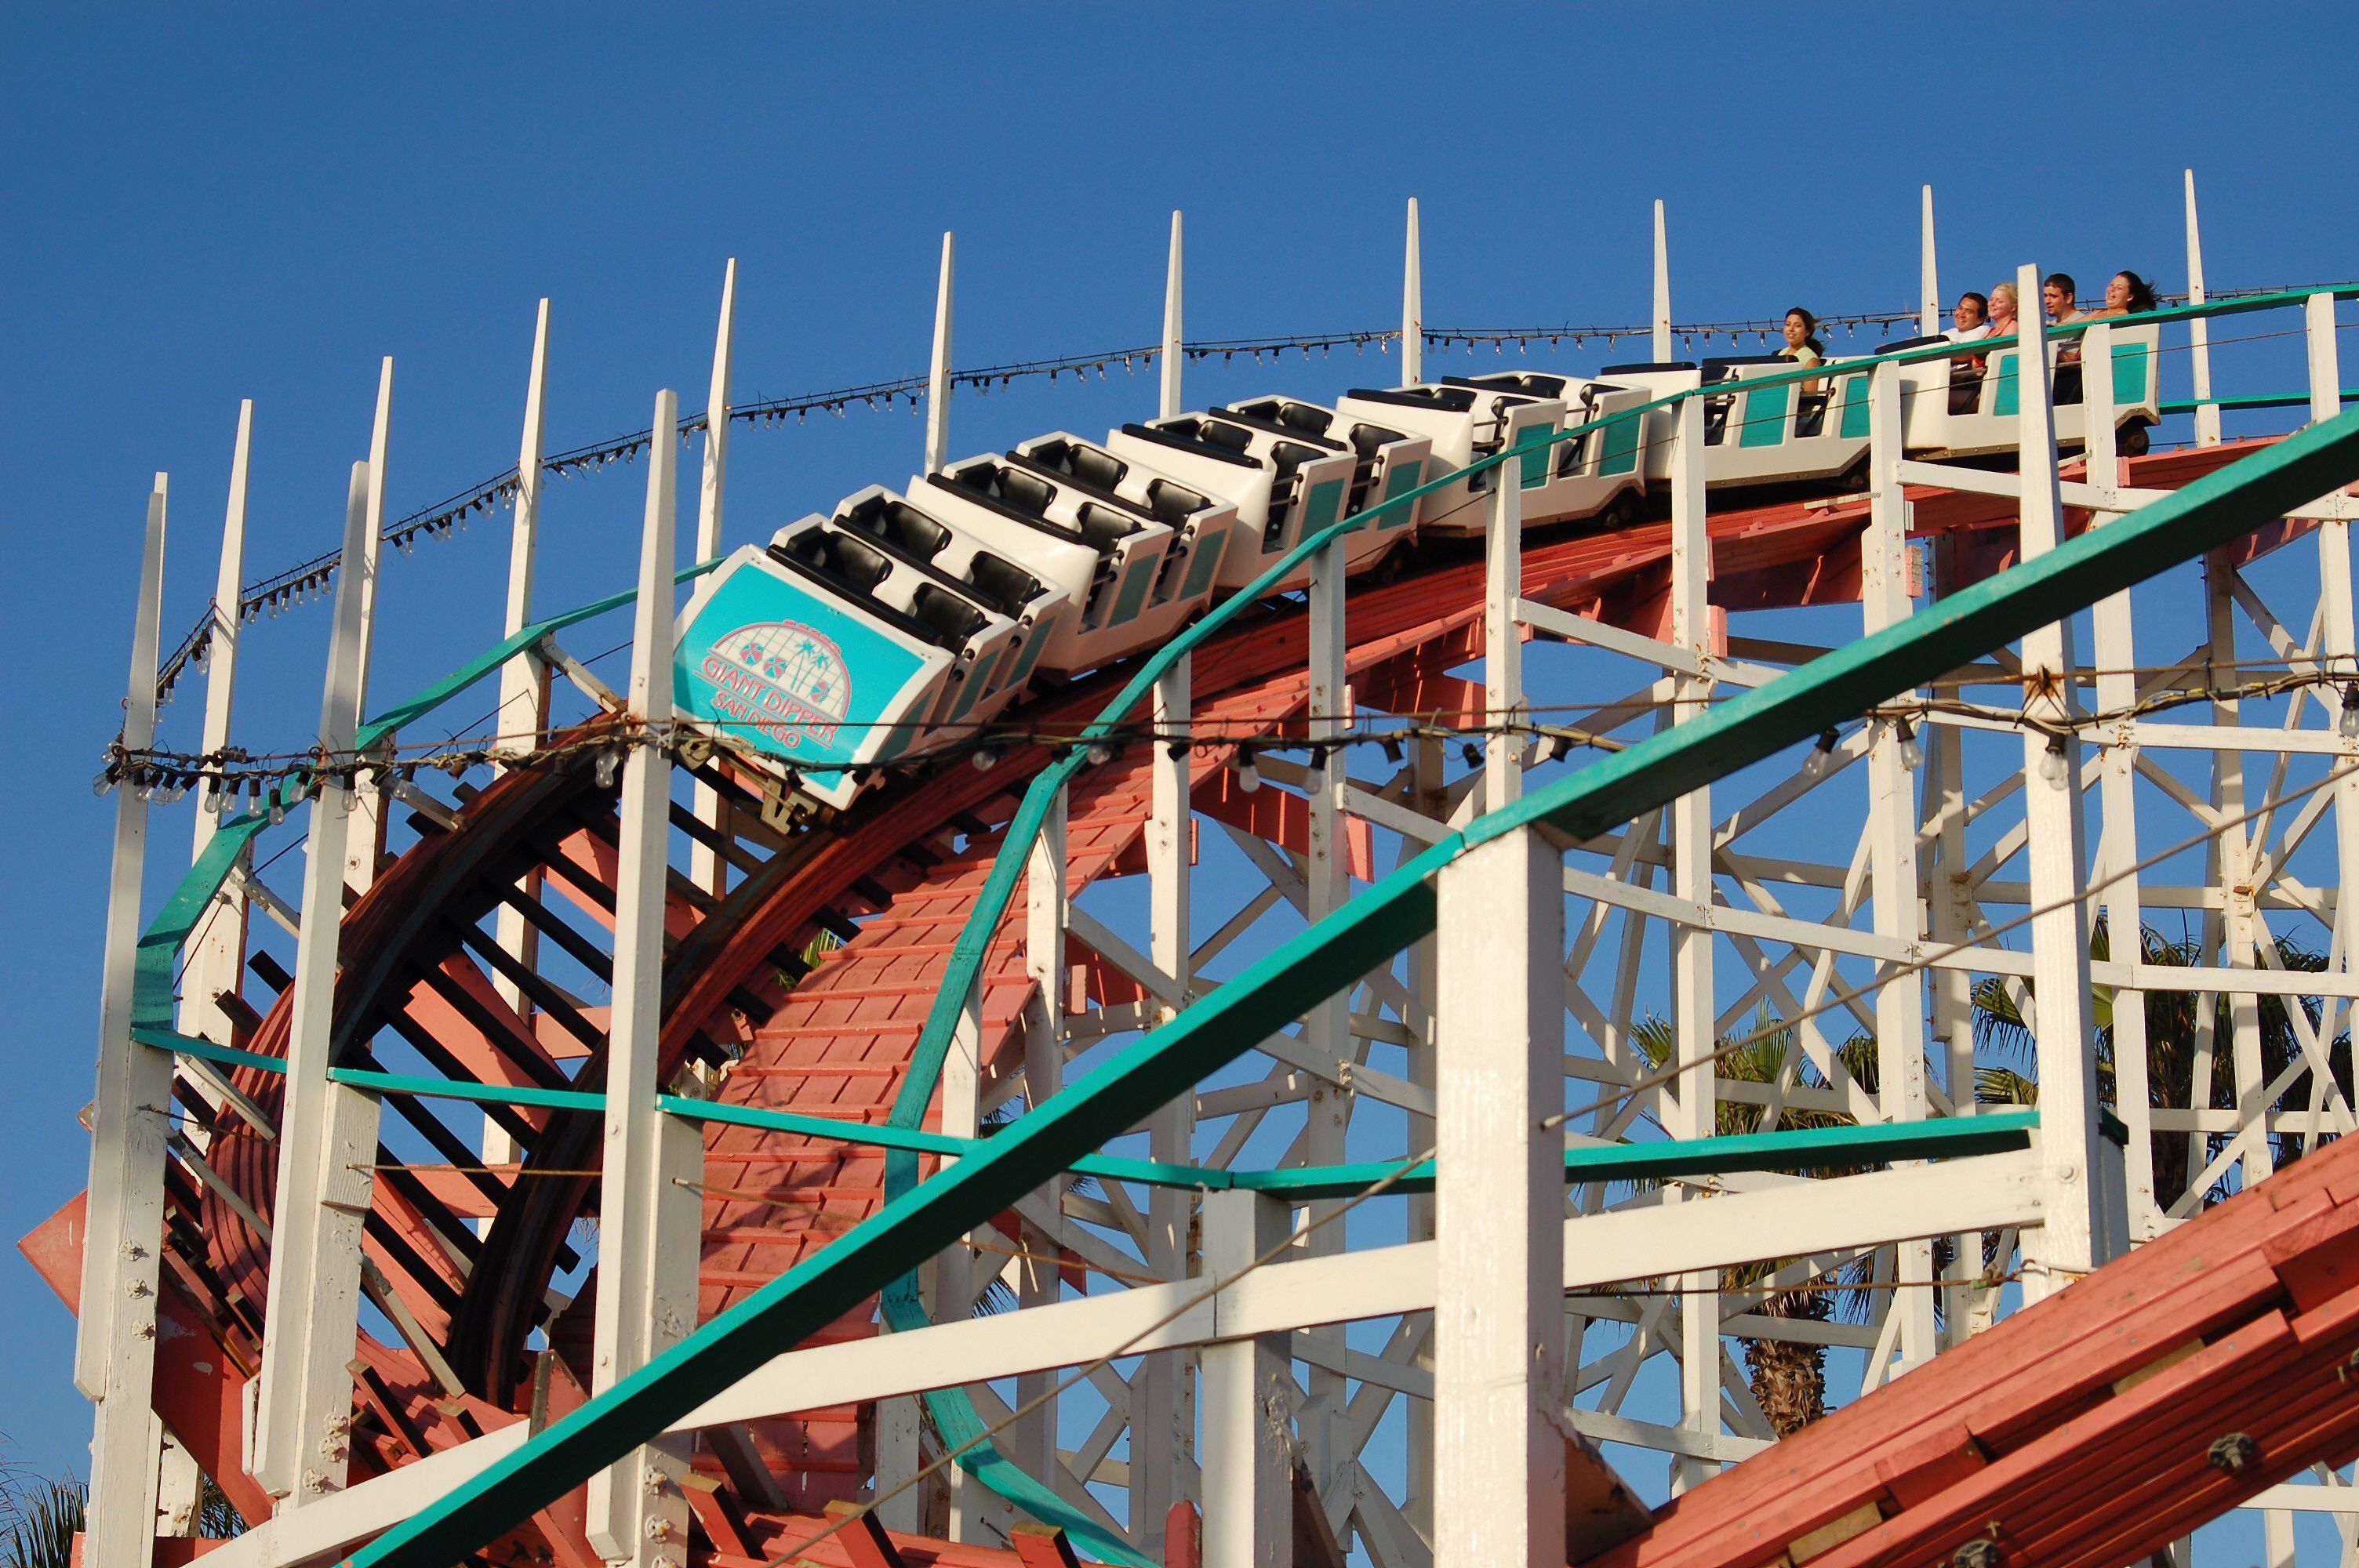 Belmont Park San Diego | Attractions in Southern California